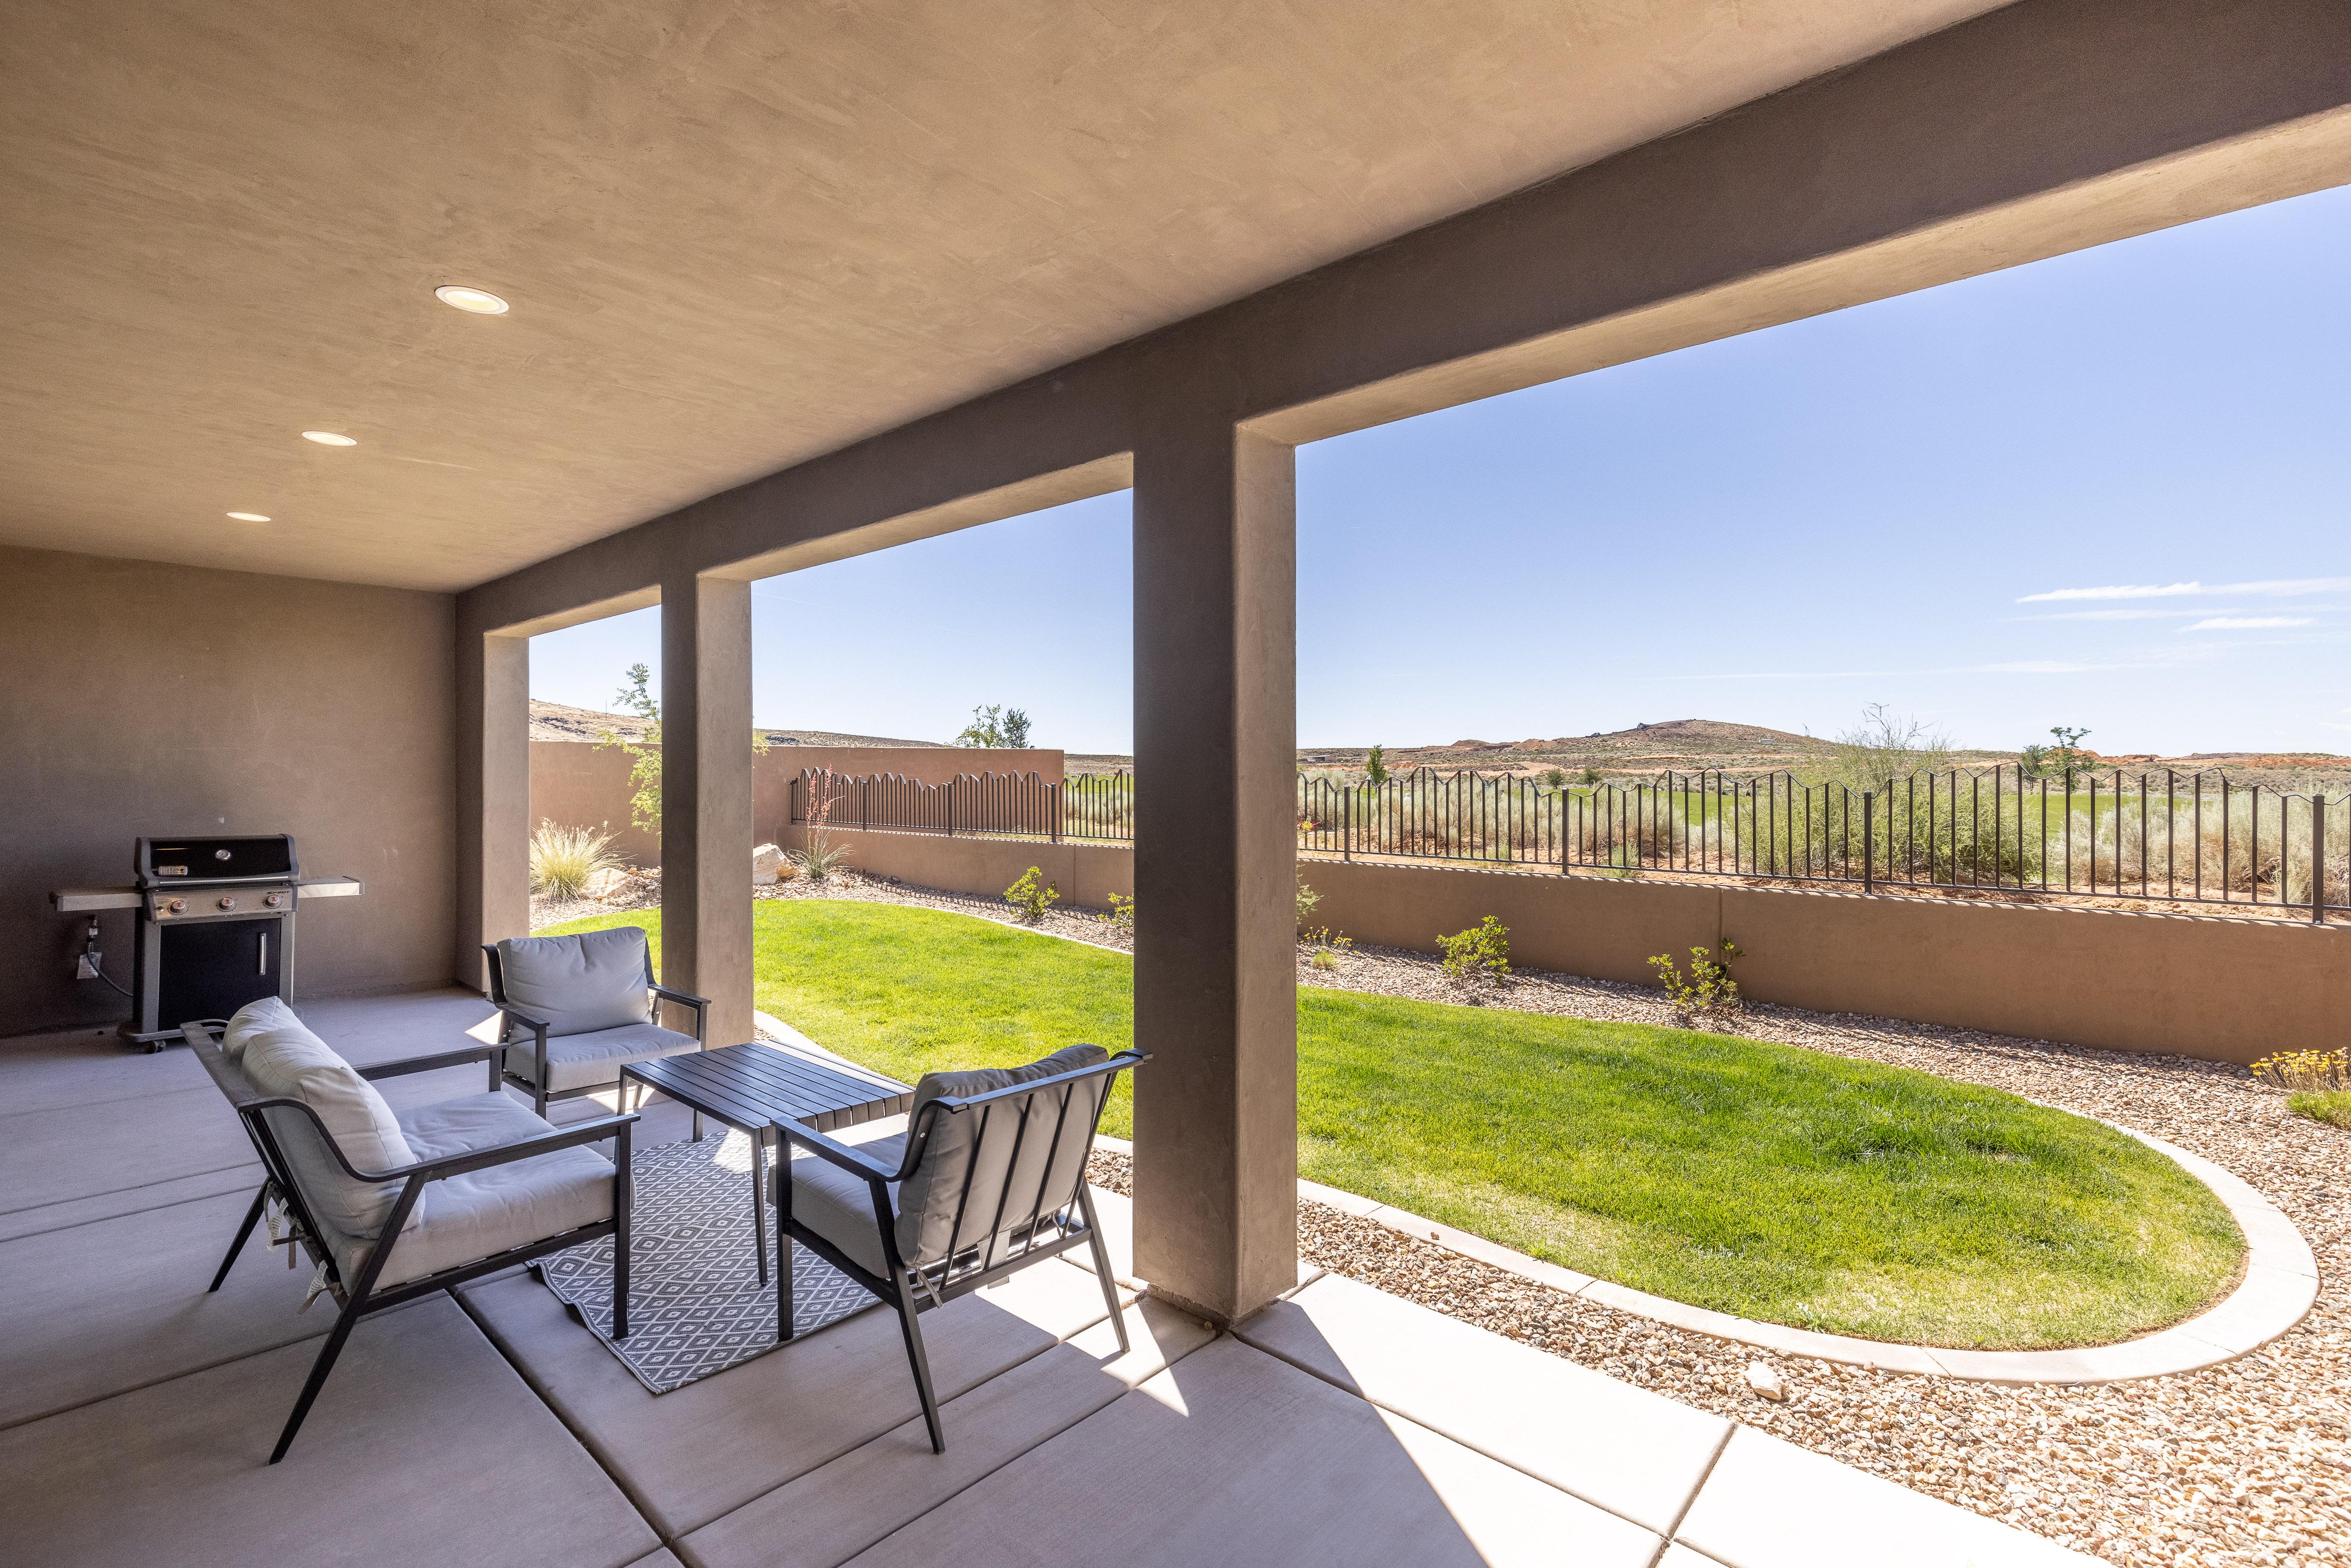 The Back Patio includes an outdoor dining table, BBQ grill, and sliding glass door that leads into the living room.